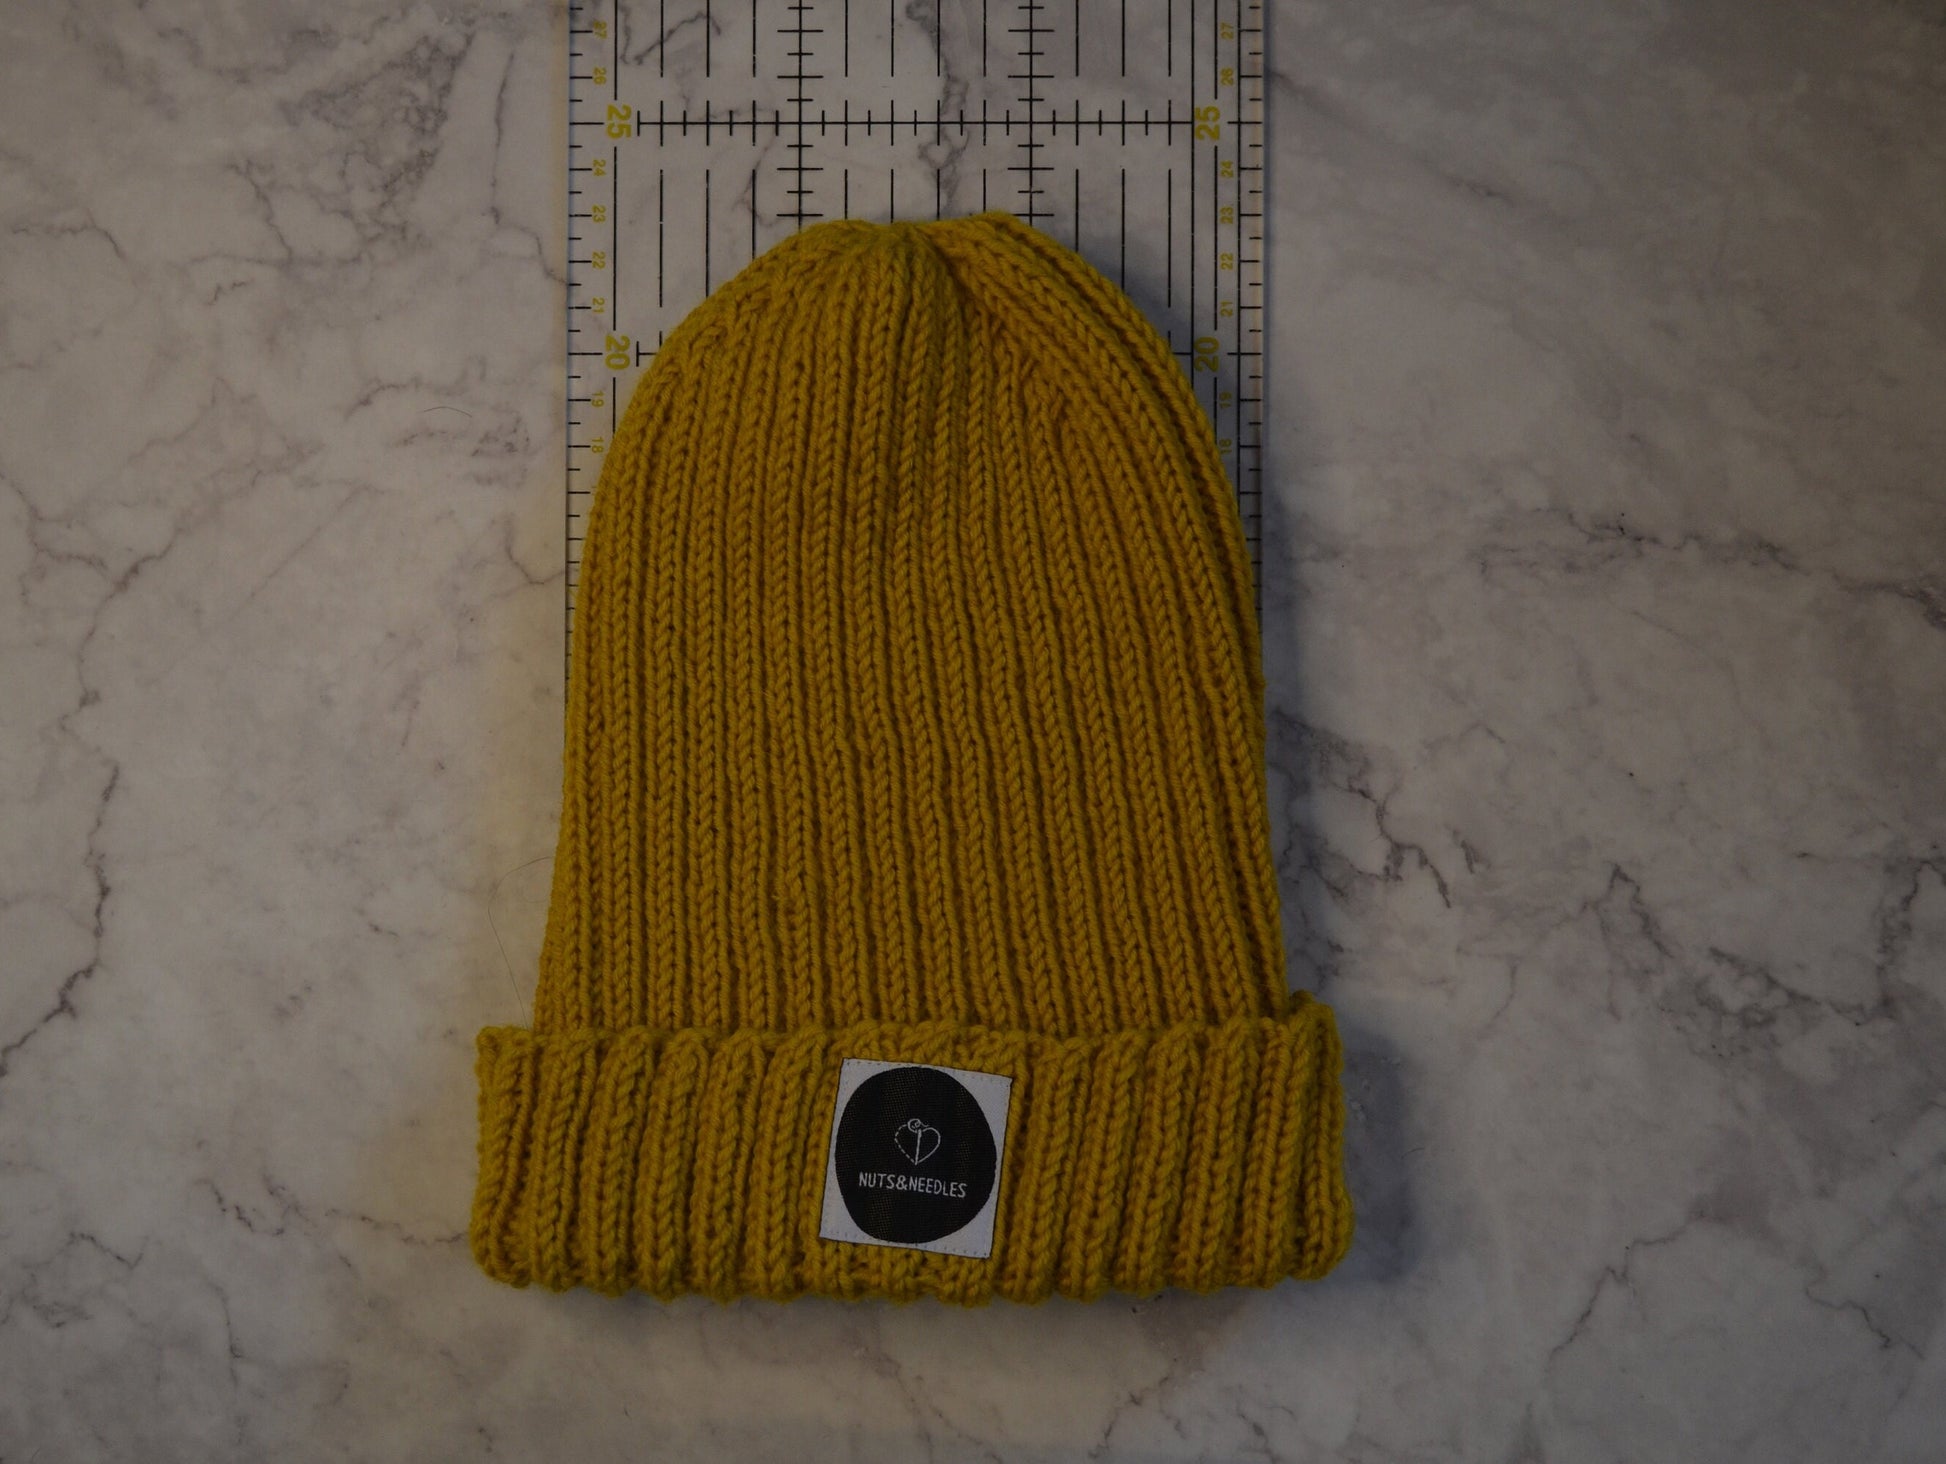 Beanie Addiction Awareness, Mental Health, part of profit donated to Charity, handmade knitwear, knit merinowool beanie, self care, recovery